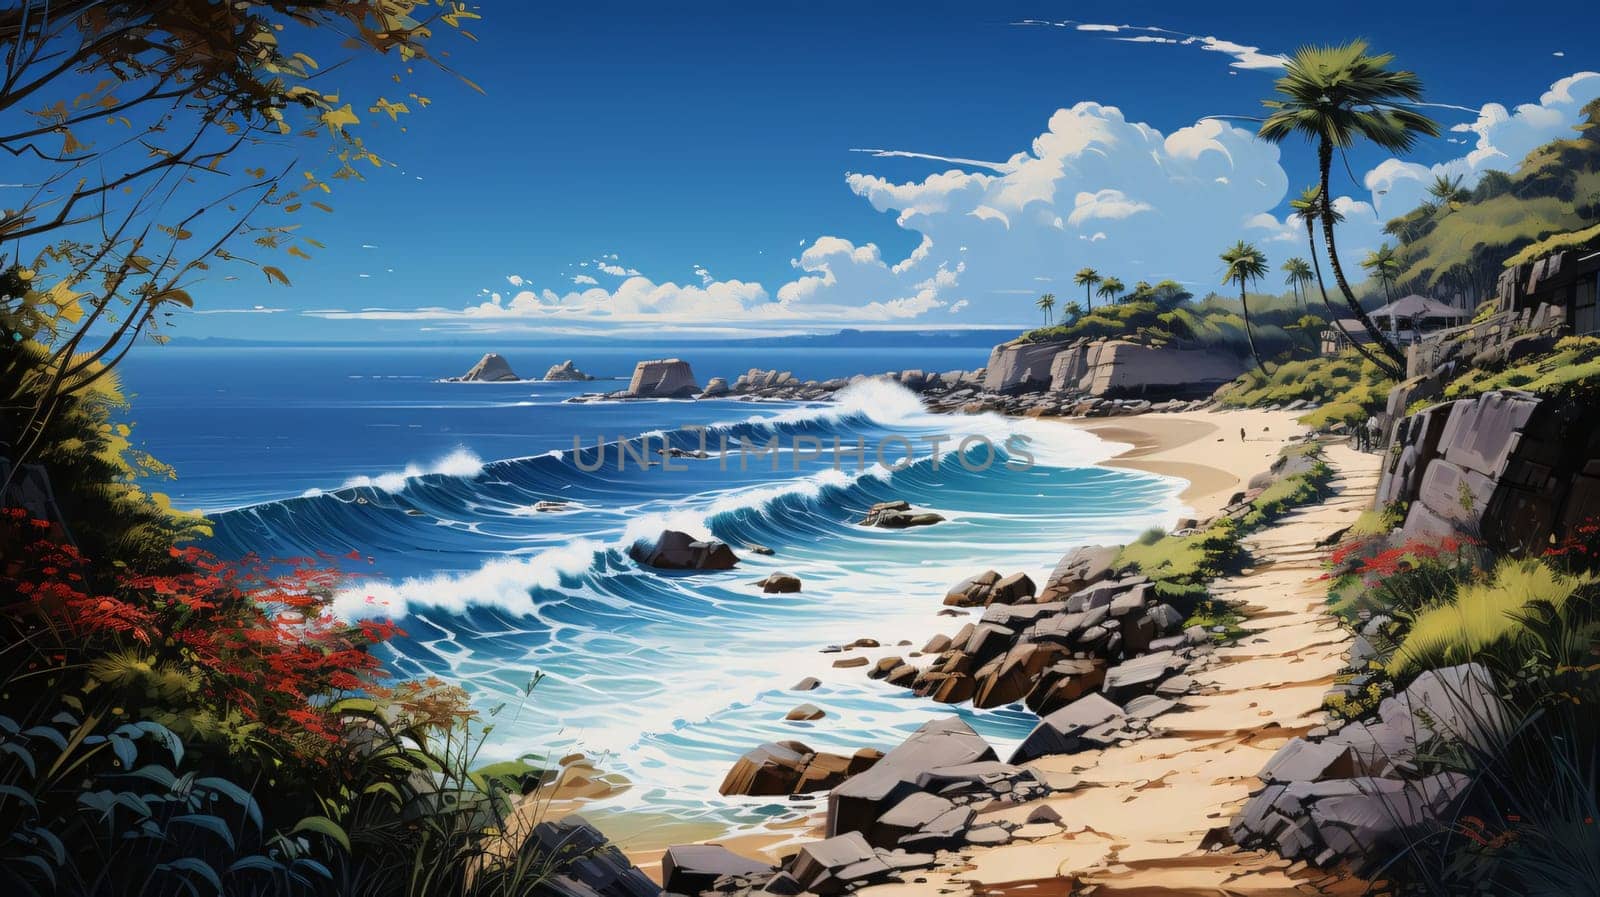 Banner: Digital painting of a beach with palm trees, rocks and ocean in the background